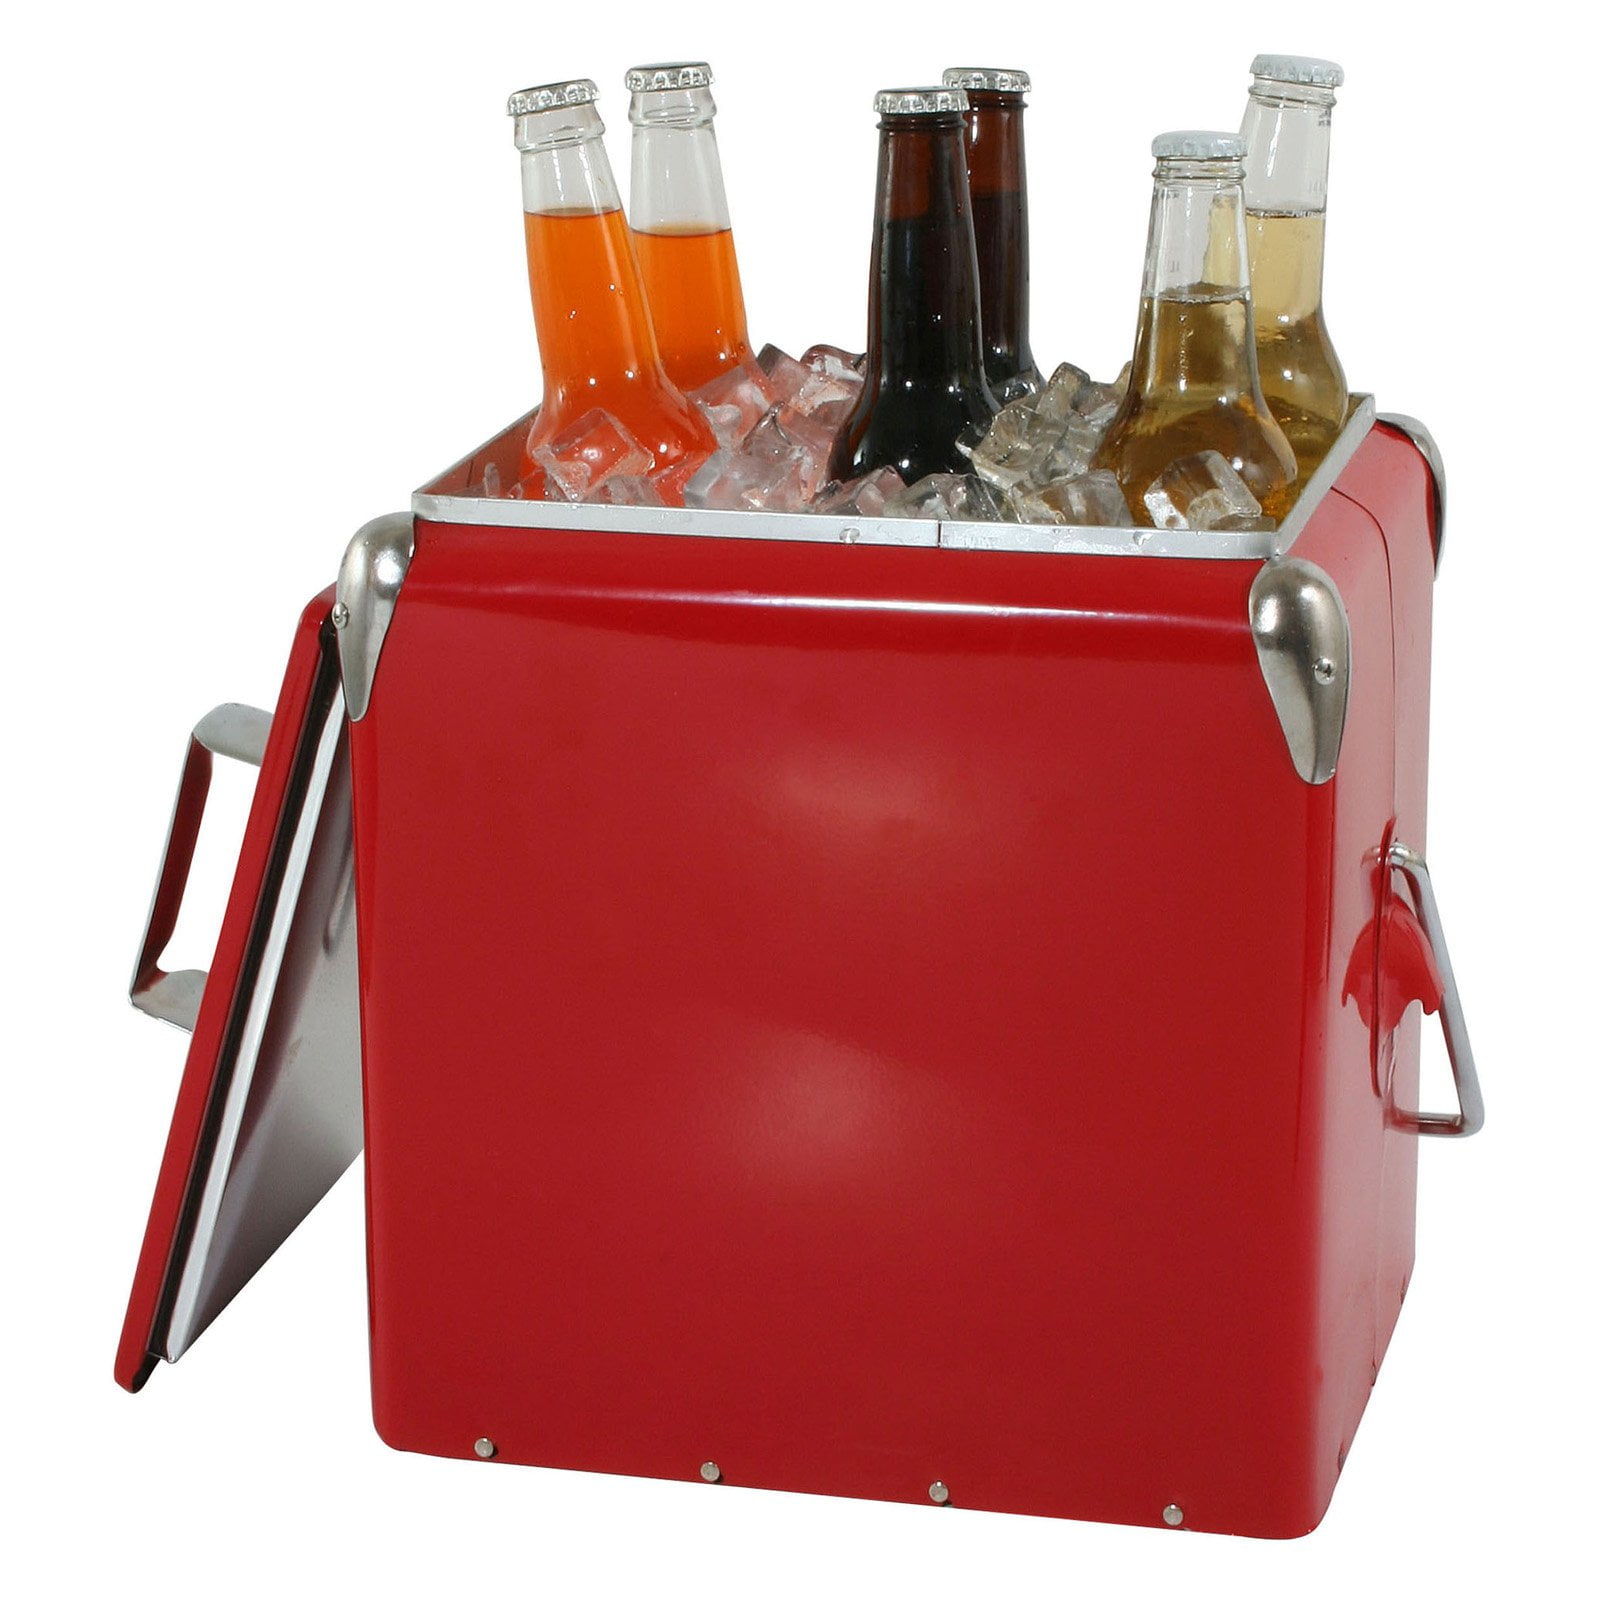 Details about   American Retro Classic Metal Blue Picnic beverage cooler with flames Vintage New 